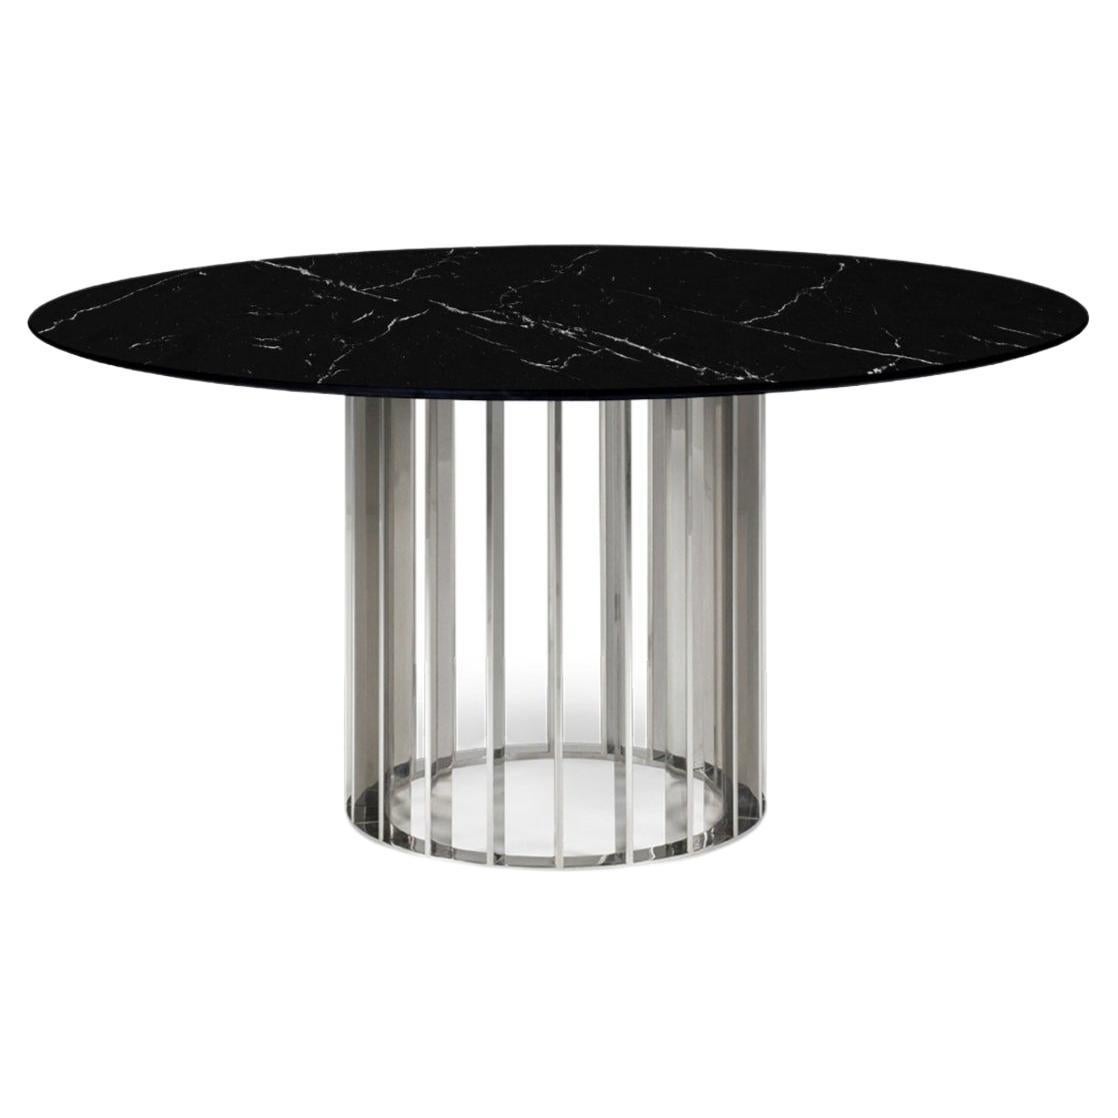 Portuguese Calacatta Marble Stainless Steel Dining Table For Sale